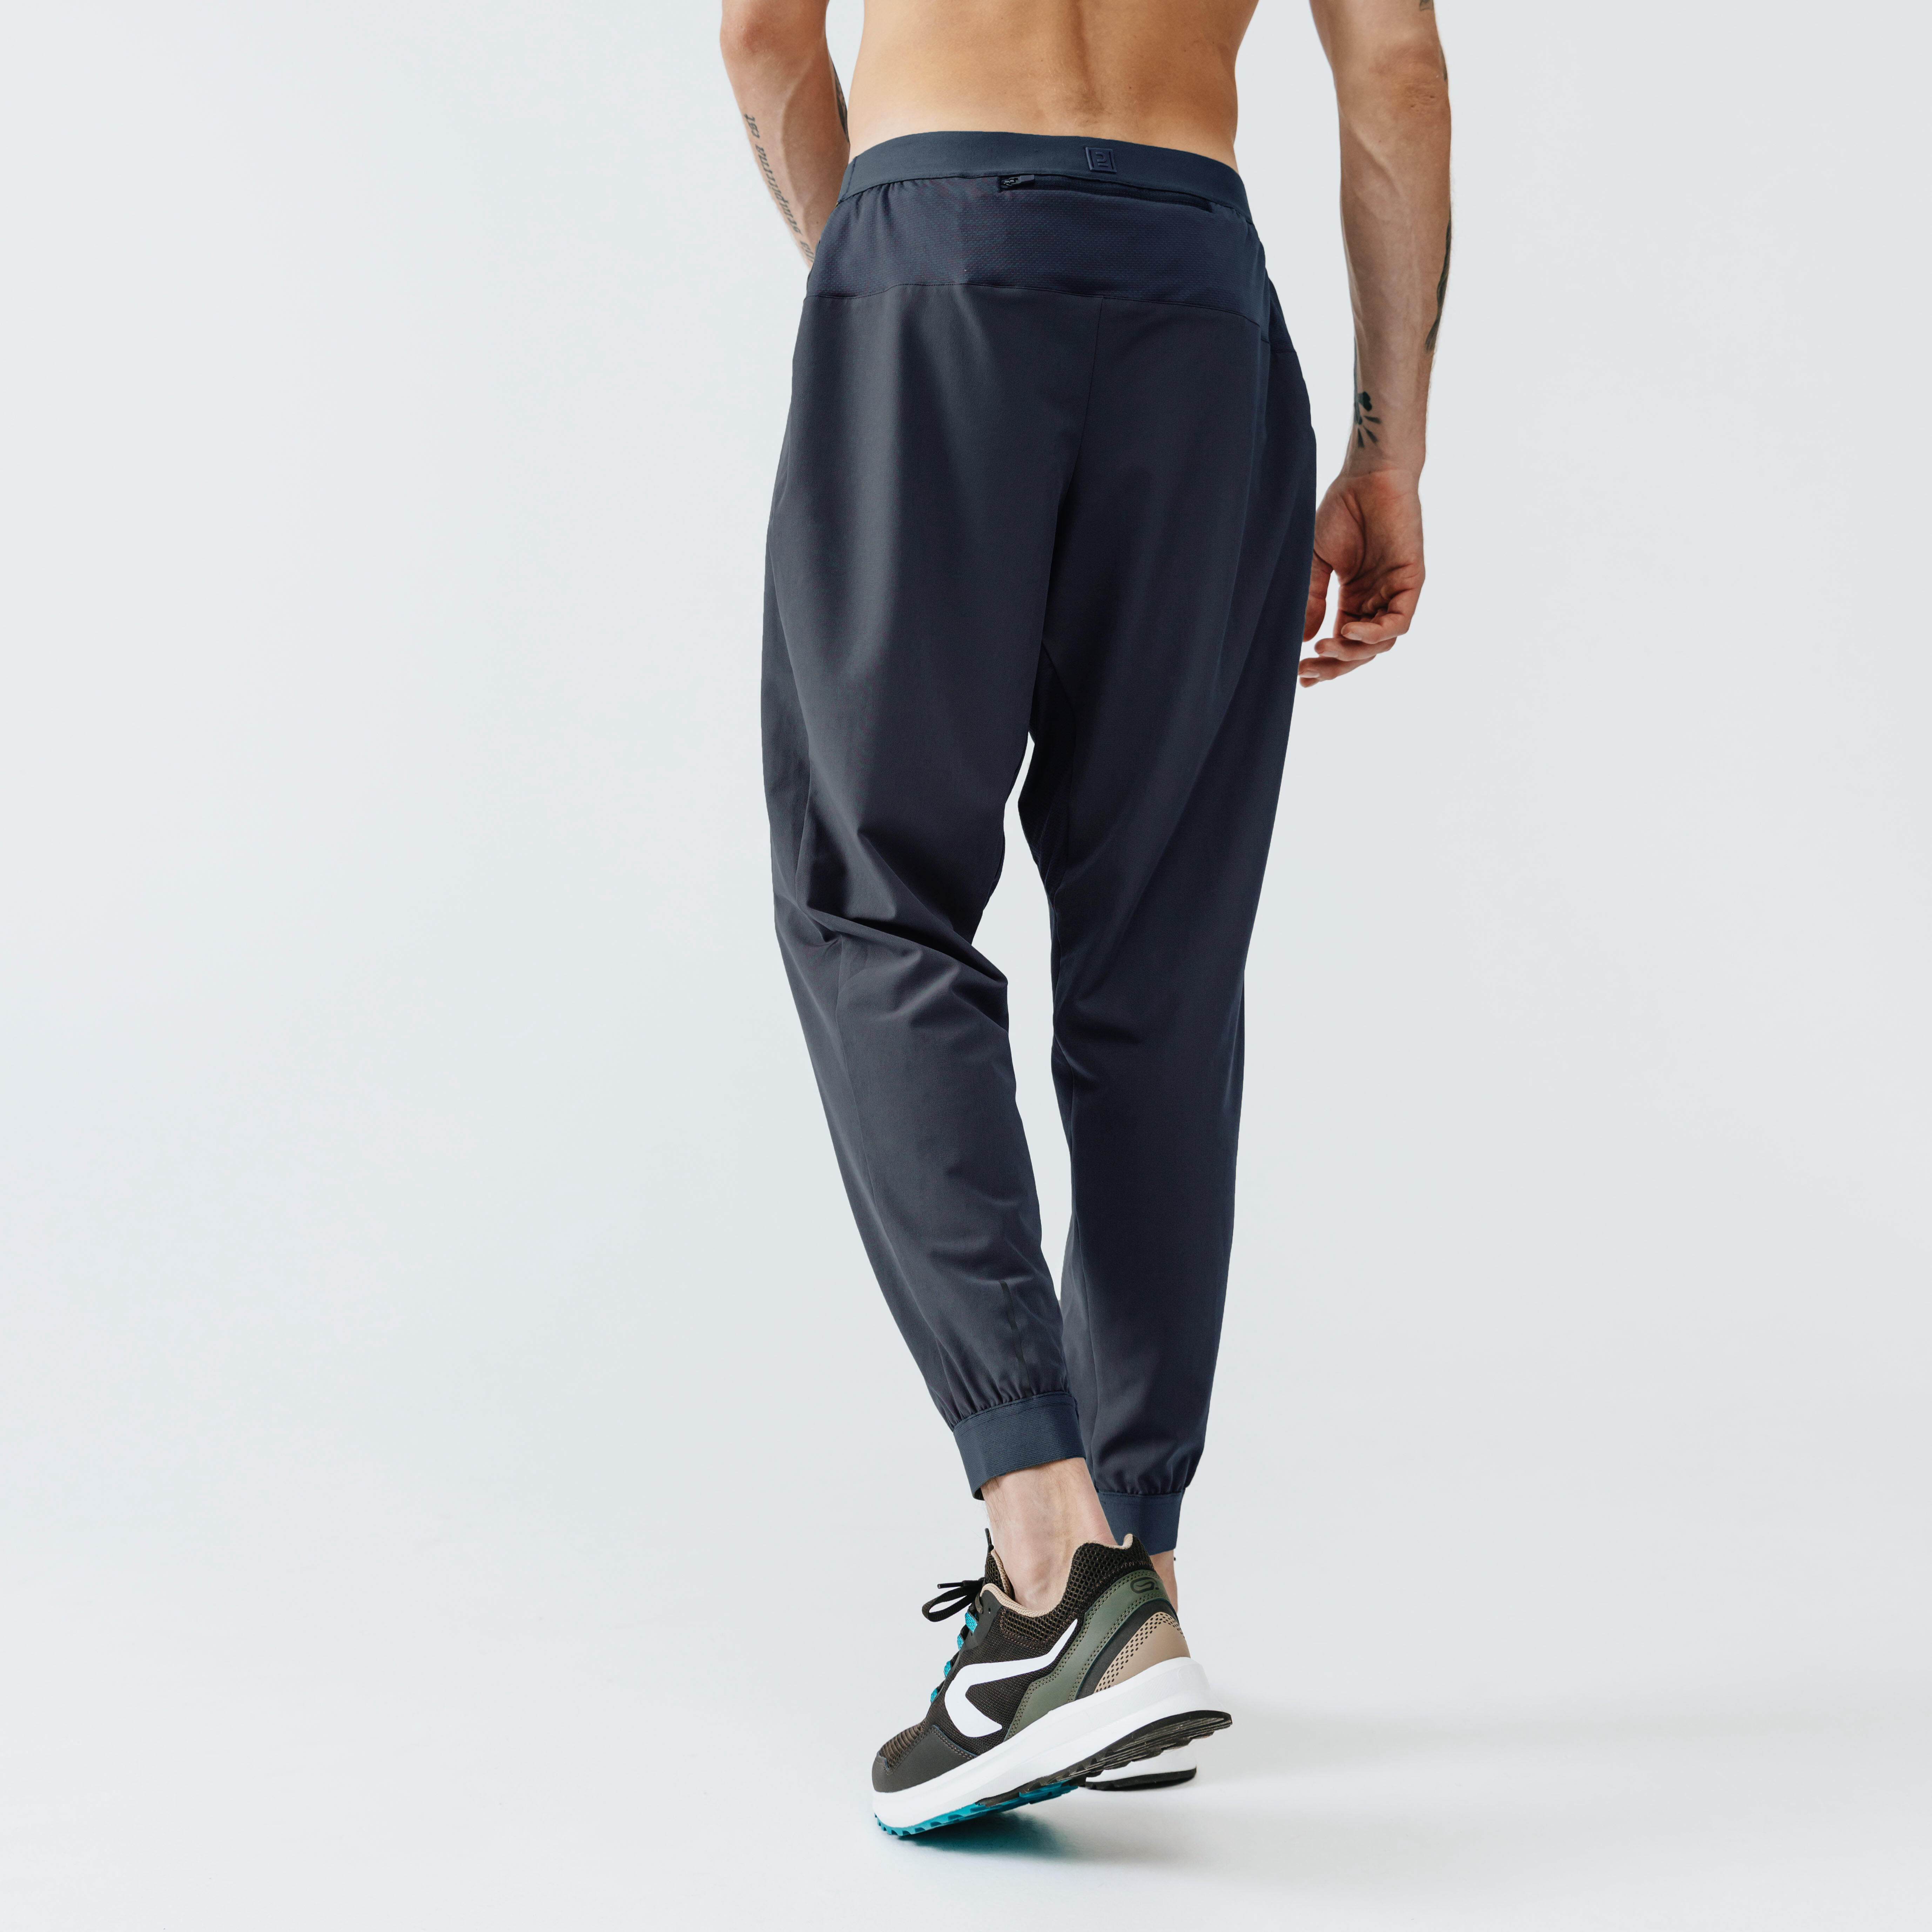 Mens Resistance Decathlon Track Pants For Enduro, Motocross, Cycling, And  Endor T6924966 From Wjfg, $58.92 | DHgate.Com